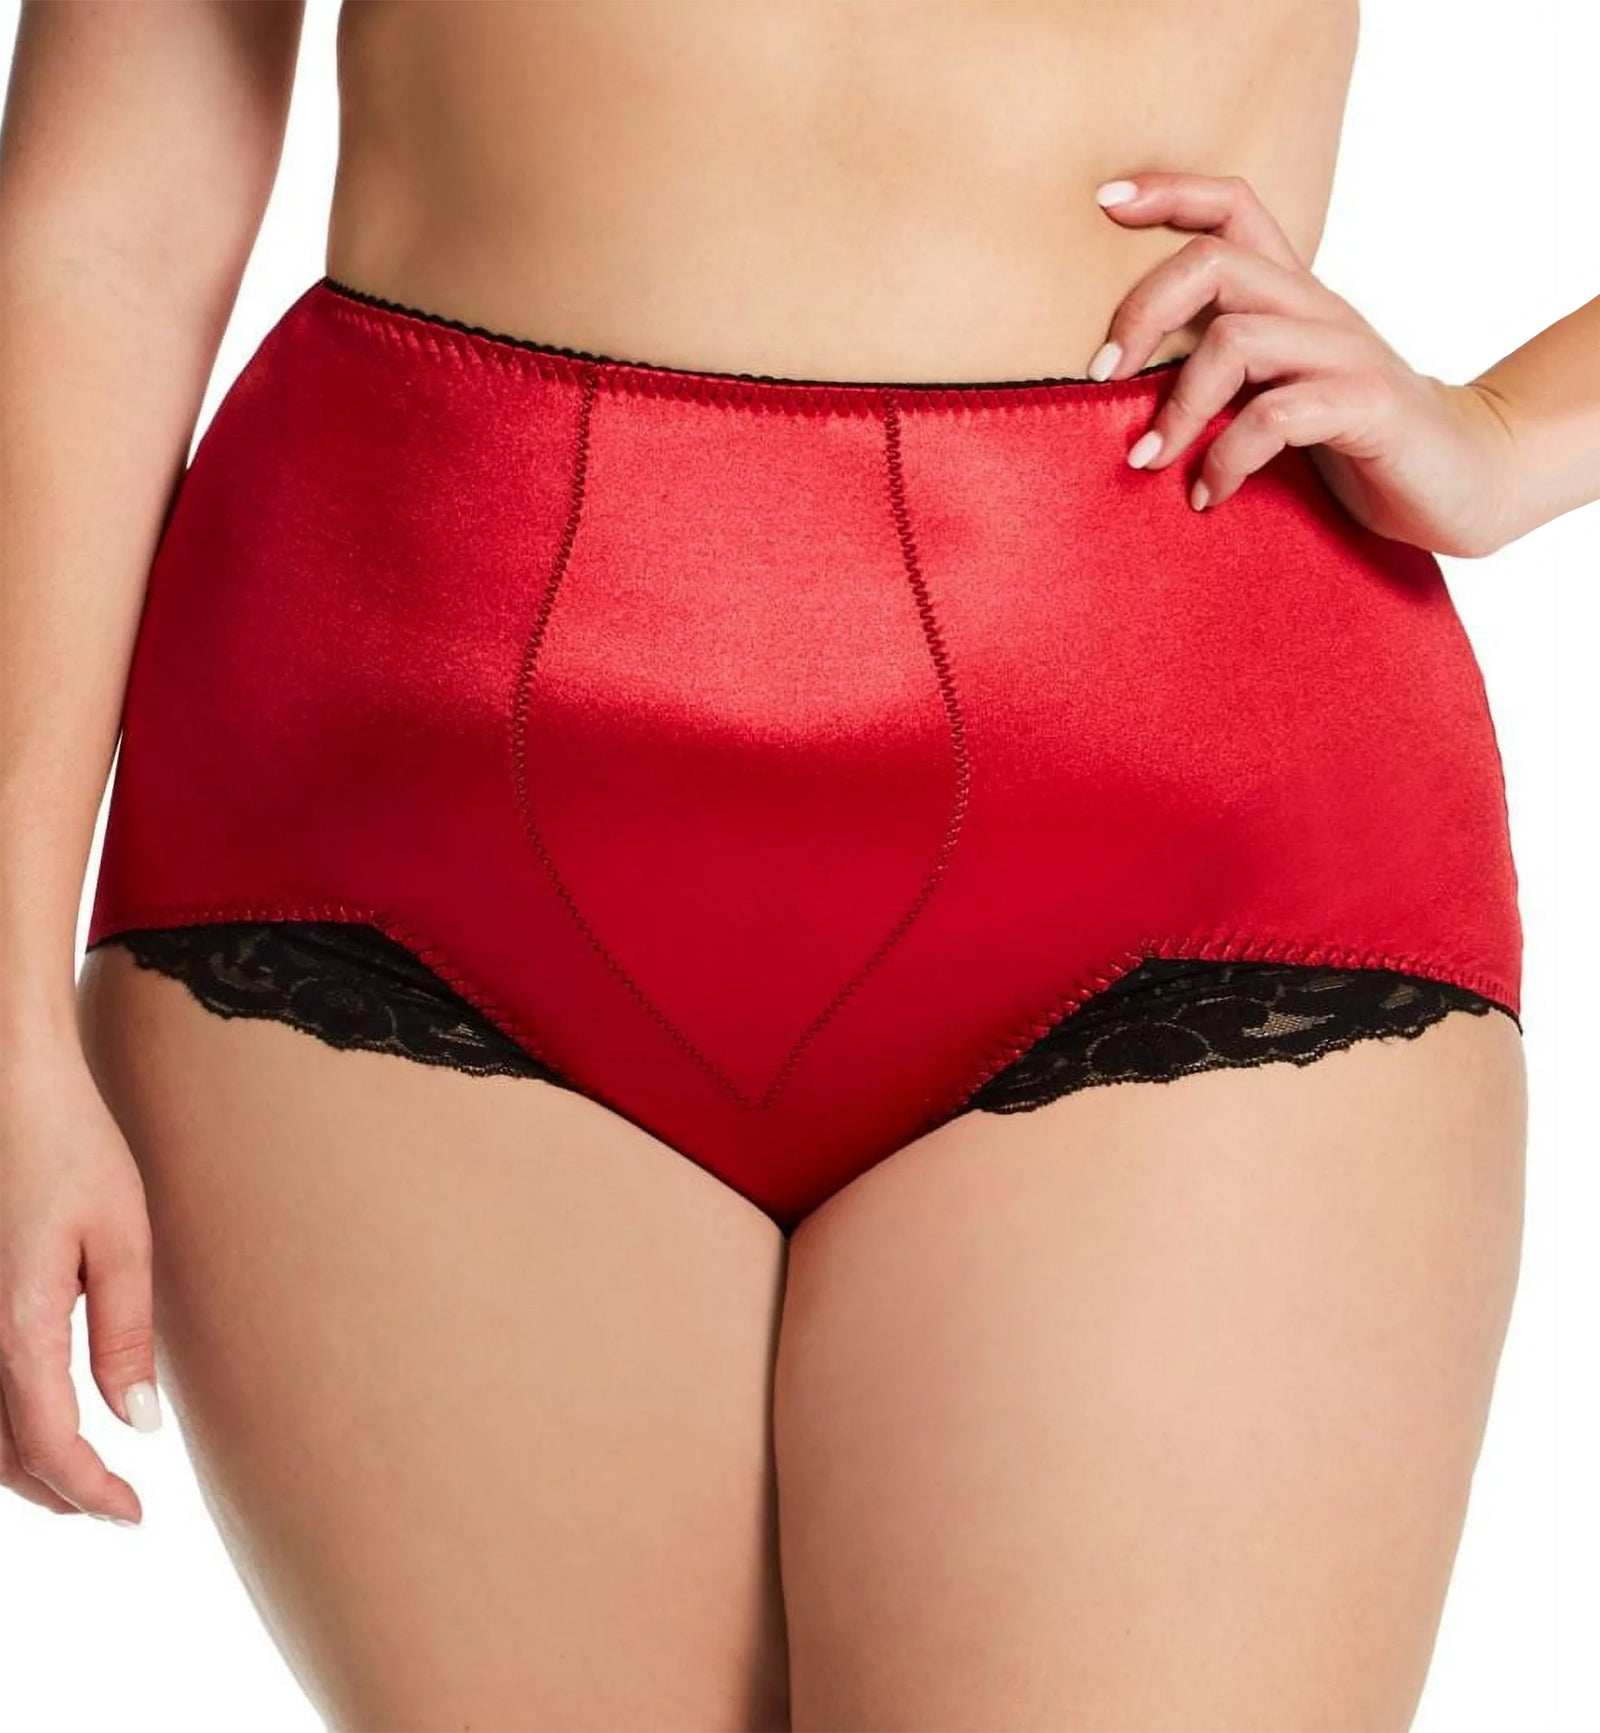 Rago Light Control V-Leg Panty Brief (919),Small,Red - Red,Small